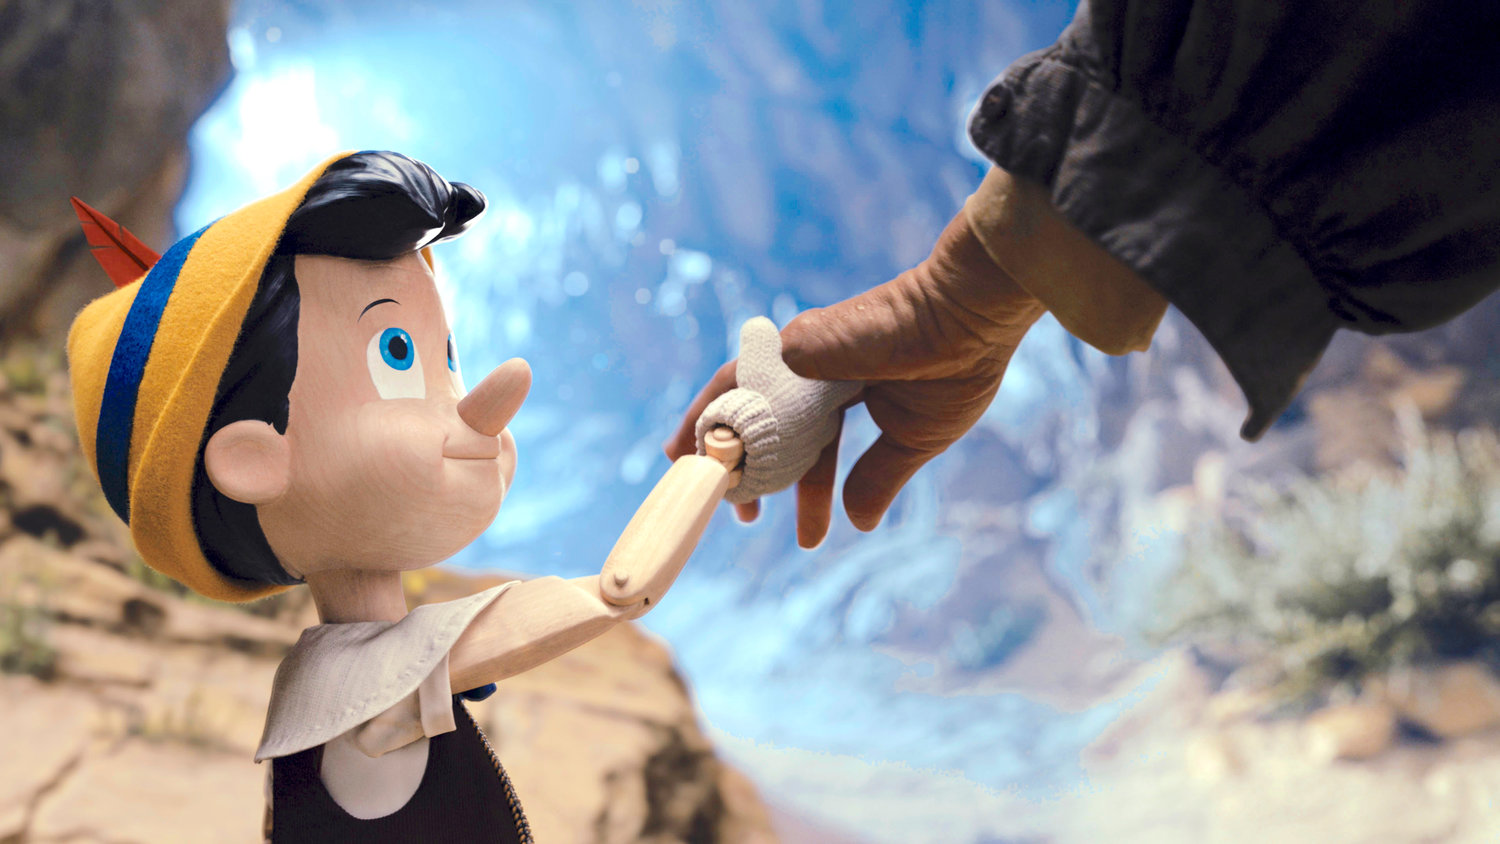 Pinocchio, voiced by Benjamin Evan Ainsworth, in Disney's live-action film "Pinocchio."